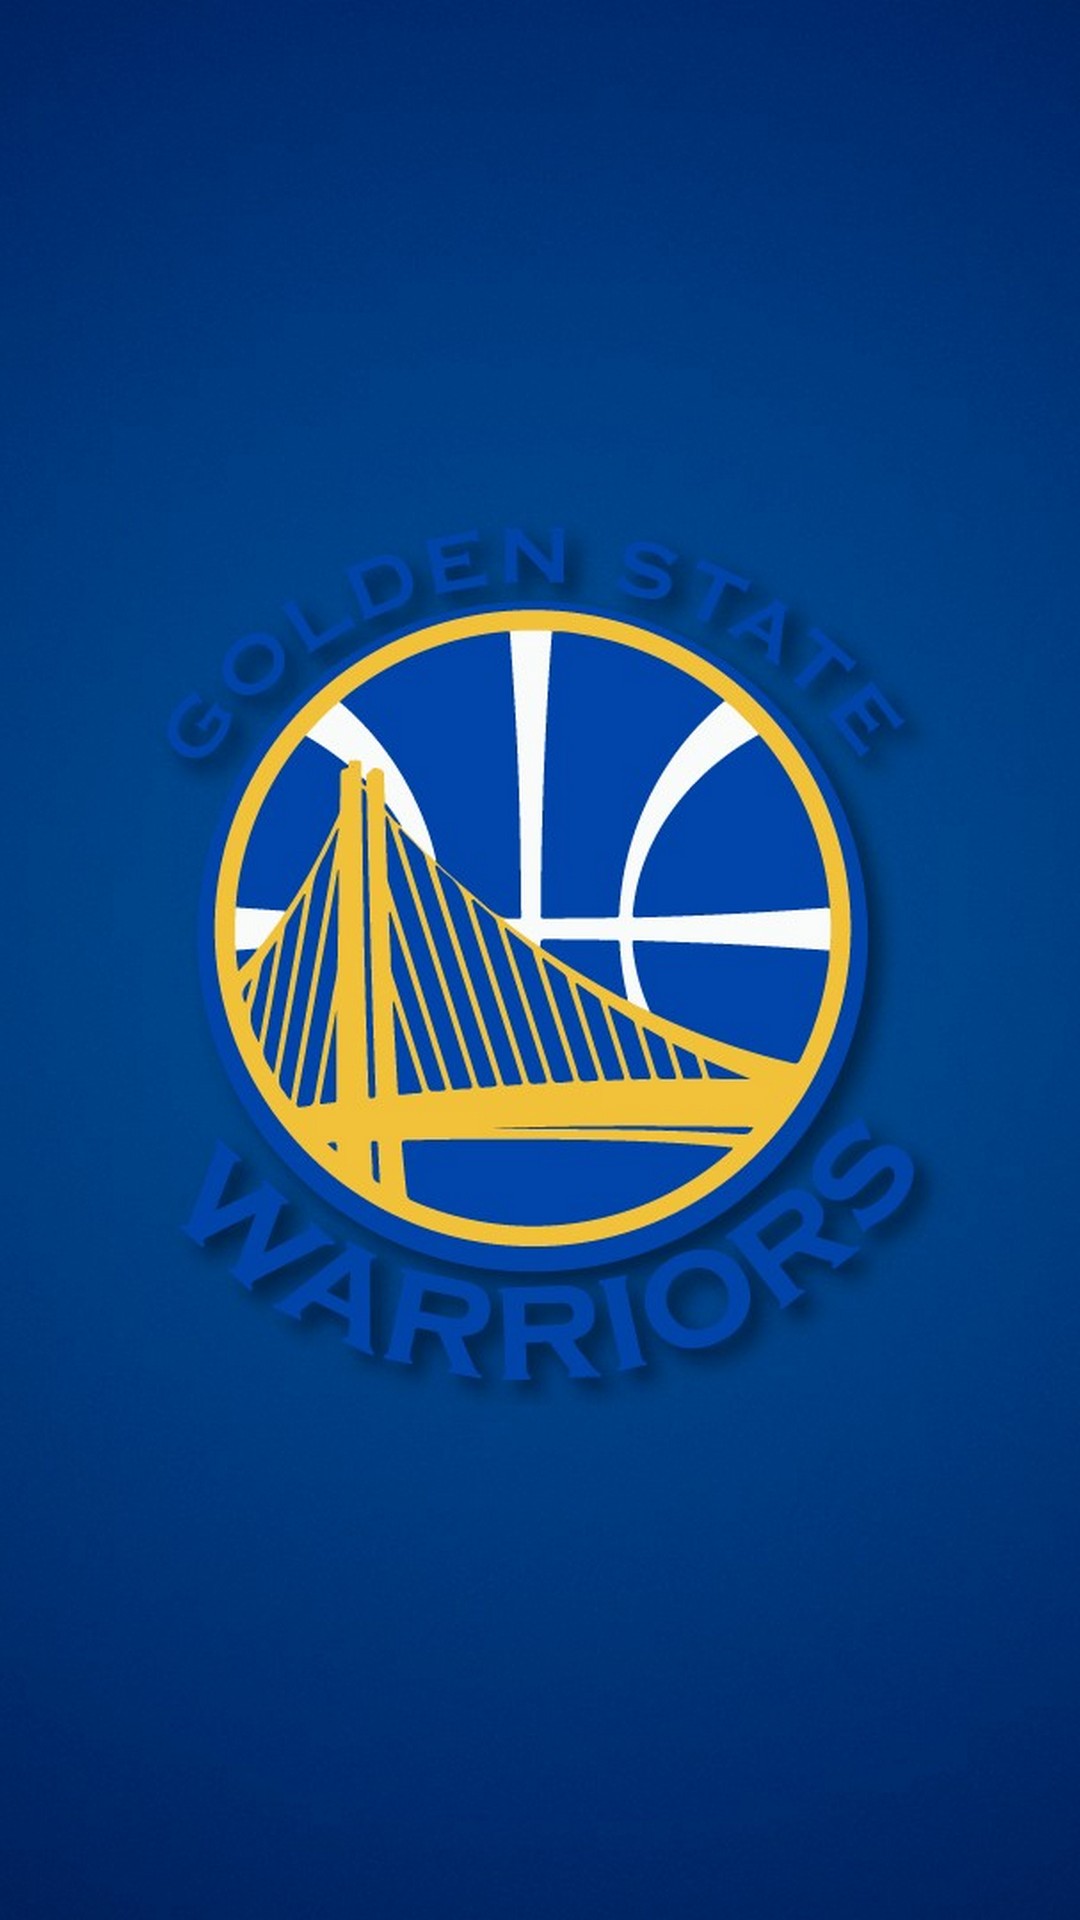 Android Wallpaper Golden State Warriors with image resolution 1080x1920 pixel. You can make this wallpaper for your Android backgrounds, Tablet, Smartphones Screensavers and Mobile Phone Lock Screen